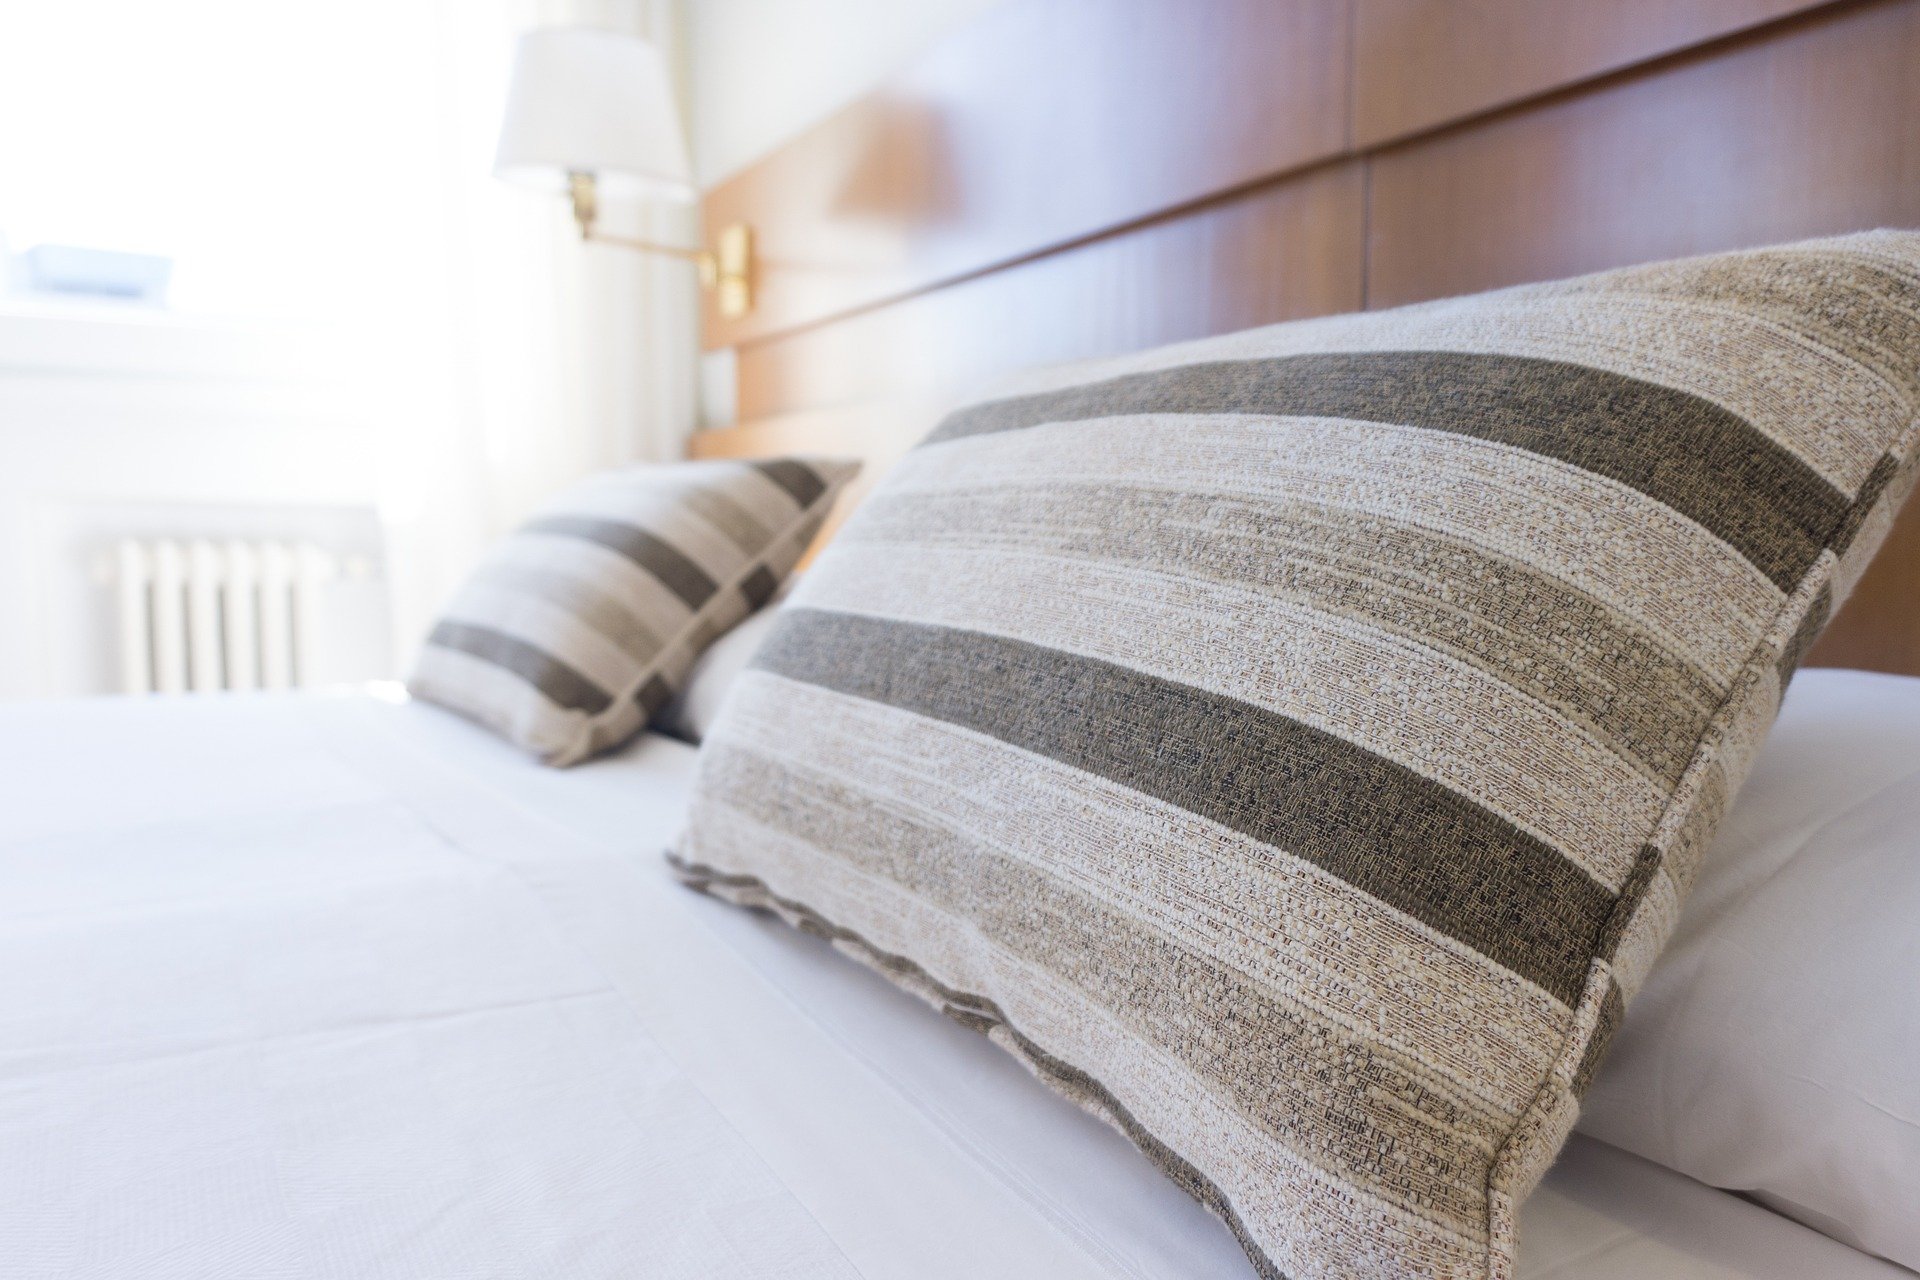 5 reasons you should make your bed every day